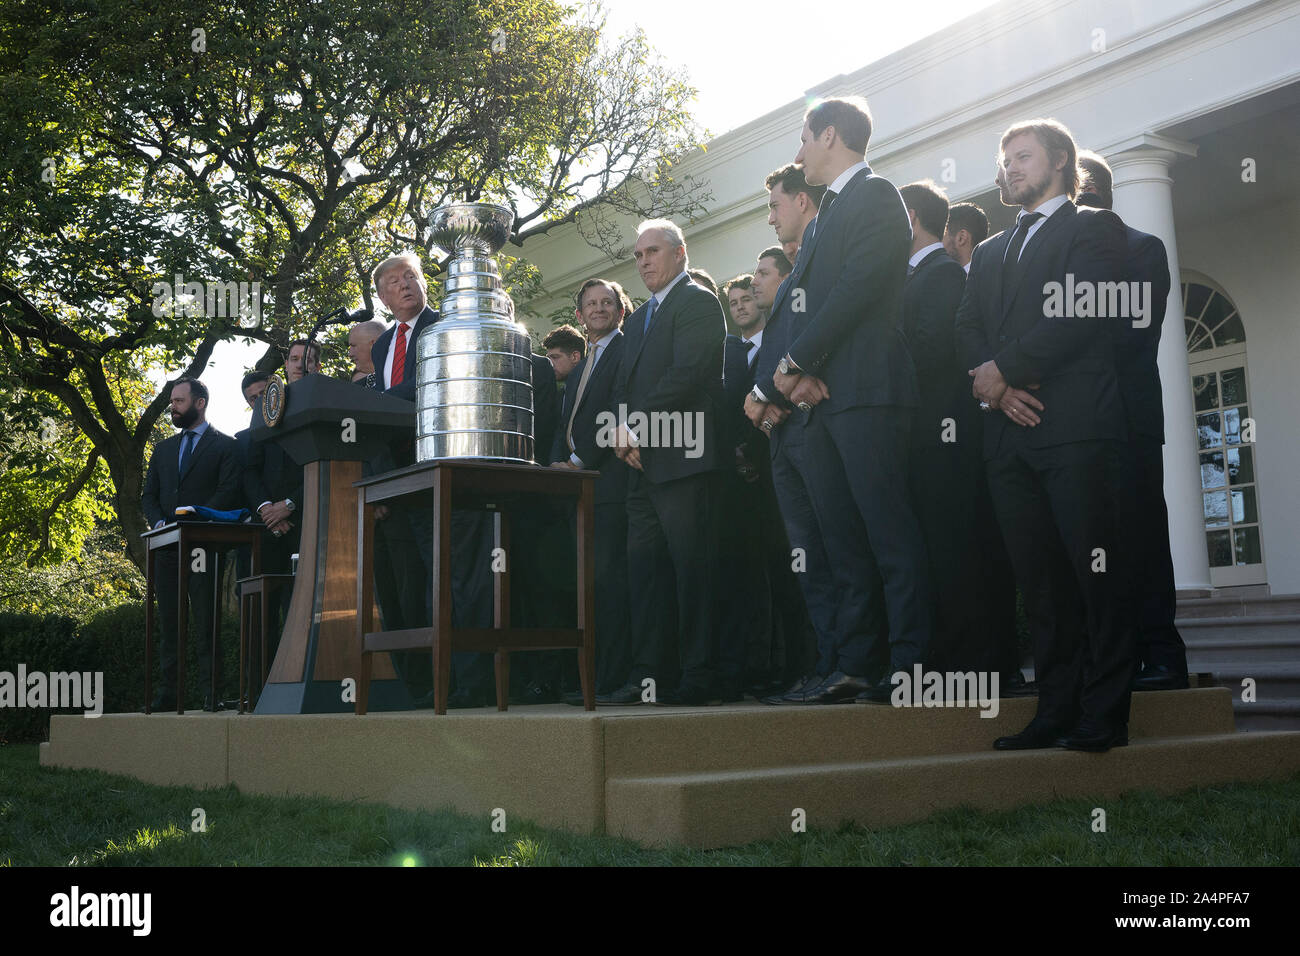 https://c8.alamy.com/comp/2A4PFA7/washington-district-of-columbia-usa-15th-oct-2019-united-states-president-donald-j-trump-hosts-the-st-louis-blues-the-2019-stanley-cup-champions-at-the-white-house-in-washington-dc-us-on-tuesday-october-15-2019-credit-stefani-reynoldscnpzuma-wirealamy-live-news-2A4PFA7.jpg